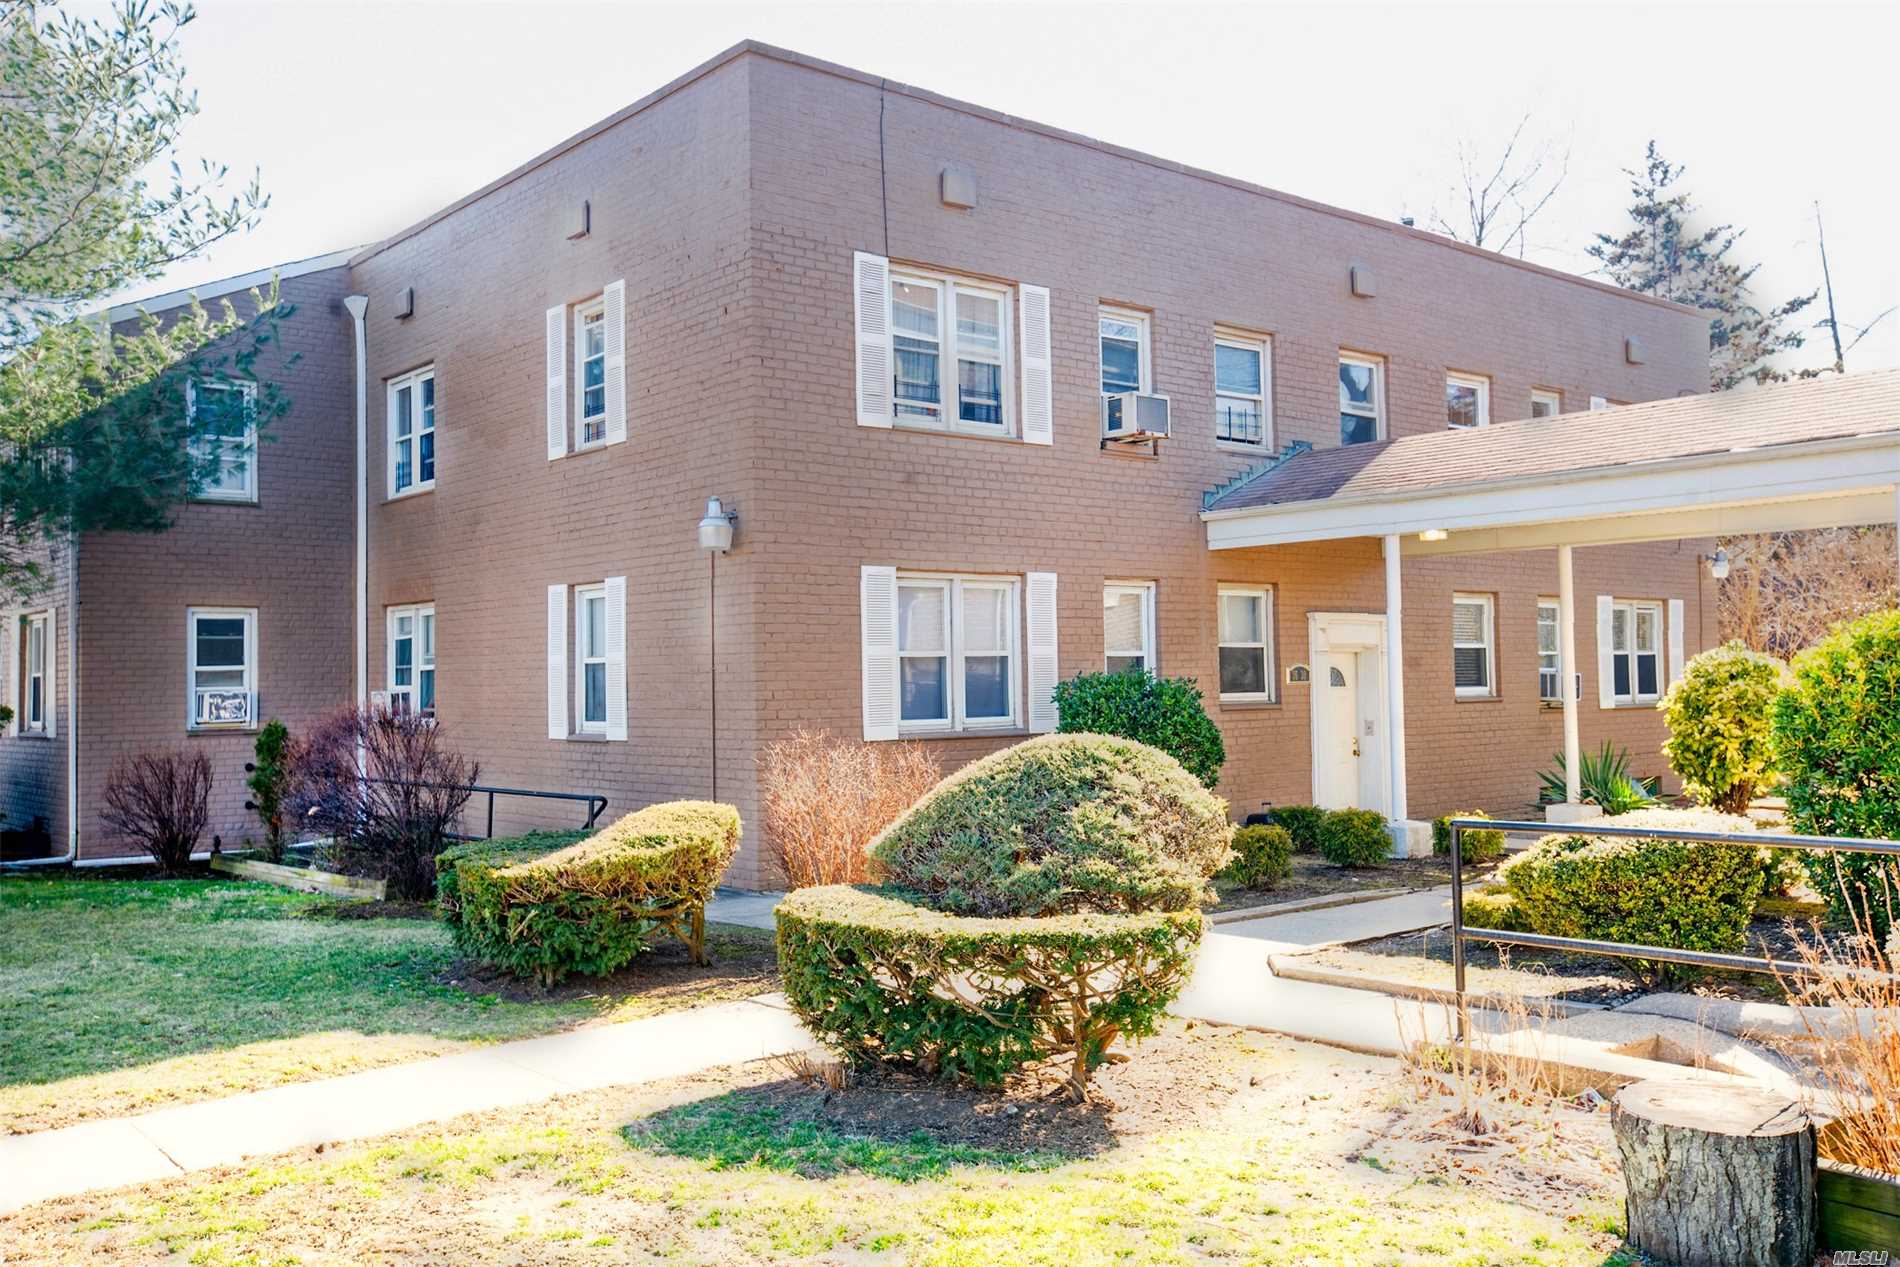 Lowest maintenance fee in the area! Commuter's dream. 2 blocks away from LIRR (25 mins to NYC). Mins to Q13, Q31 and express bus to Midtown, Manhattan. 1 block off Bell Blvd on a quiet, tree-lined residential street. Unit has been fully renovated and is in move in condition. Laundry/Dryer on the premise. Heat and water are included. Close to all. A must see!!